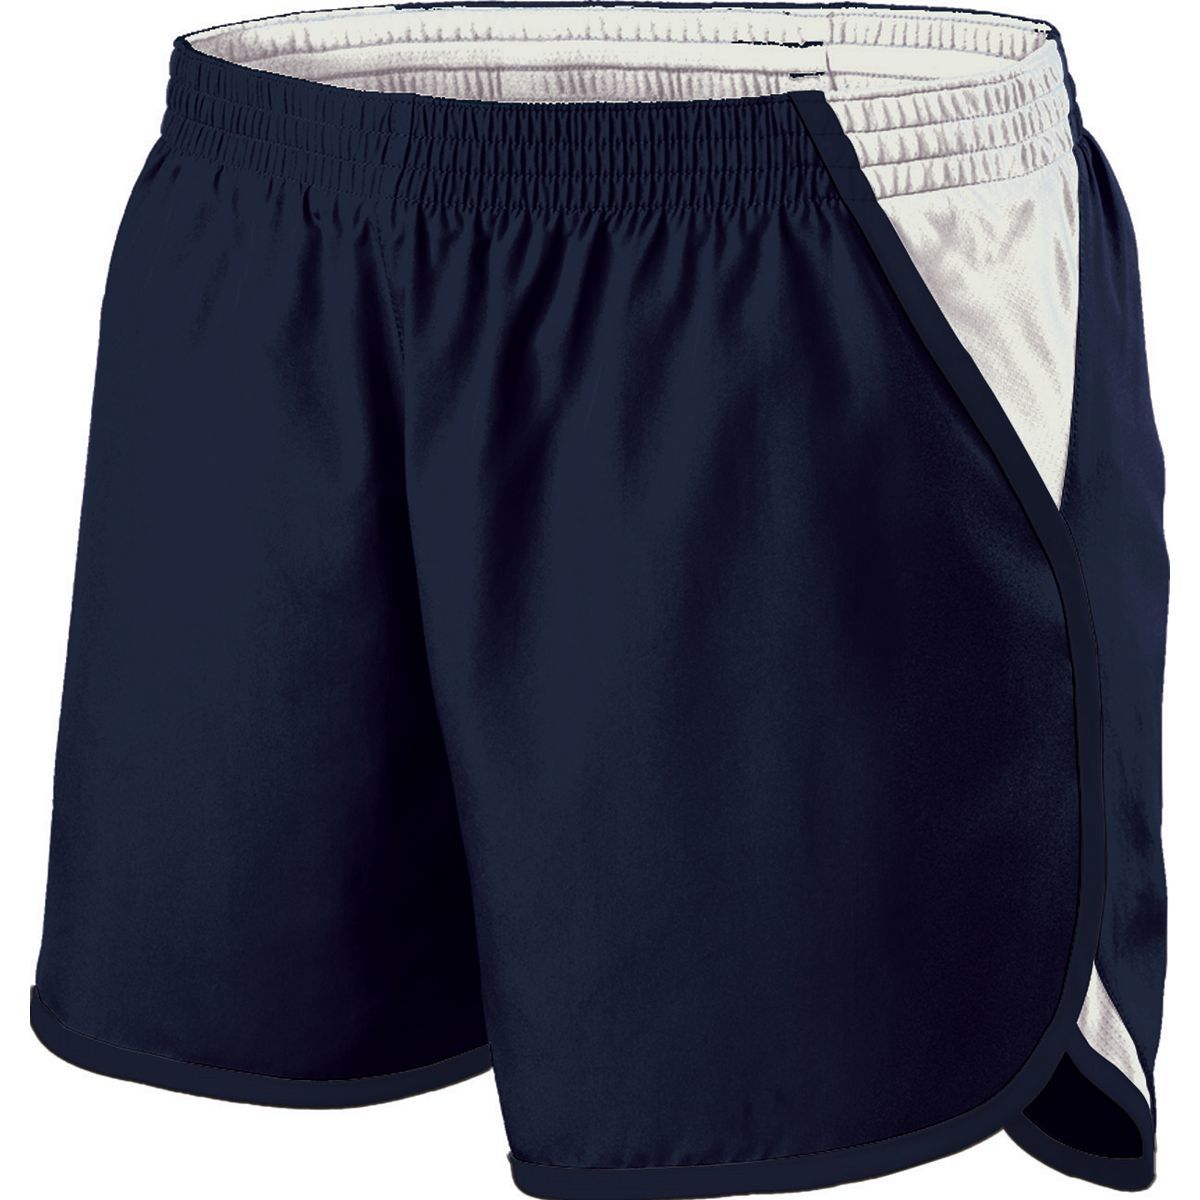 Holloway Girls Energize Shorts in Navy/White/Navy  -Part of the Girls, Holloway, Girls-Shorts product lines at KanaleyCreations.com